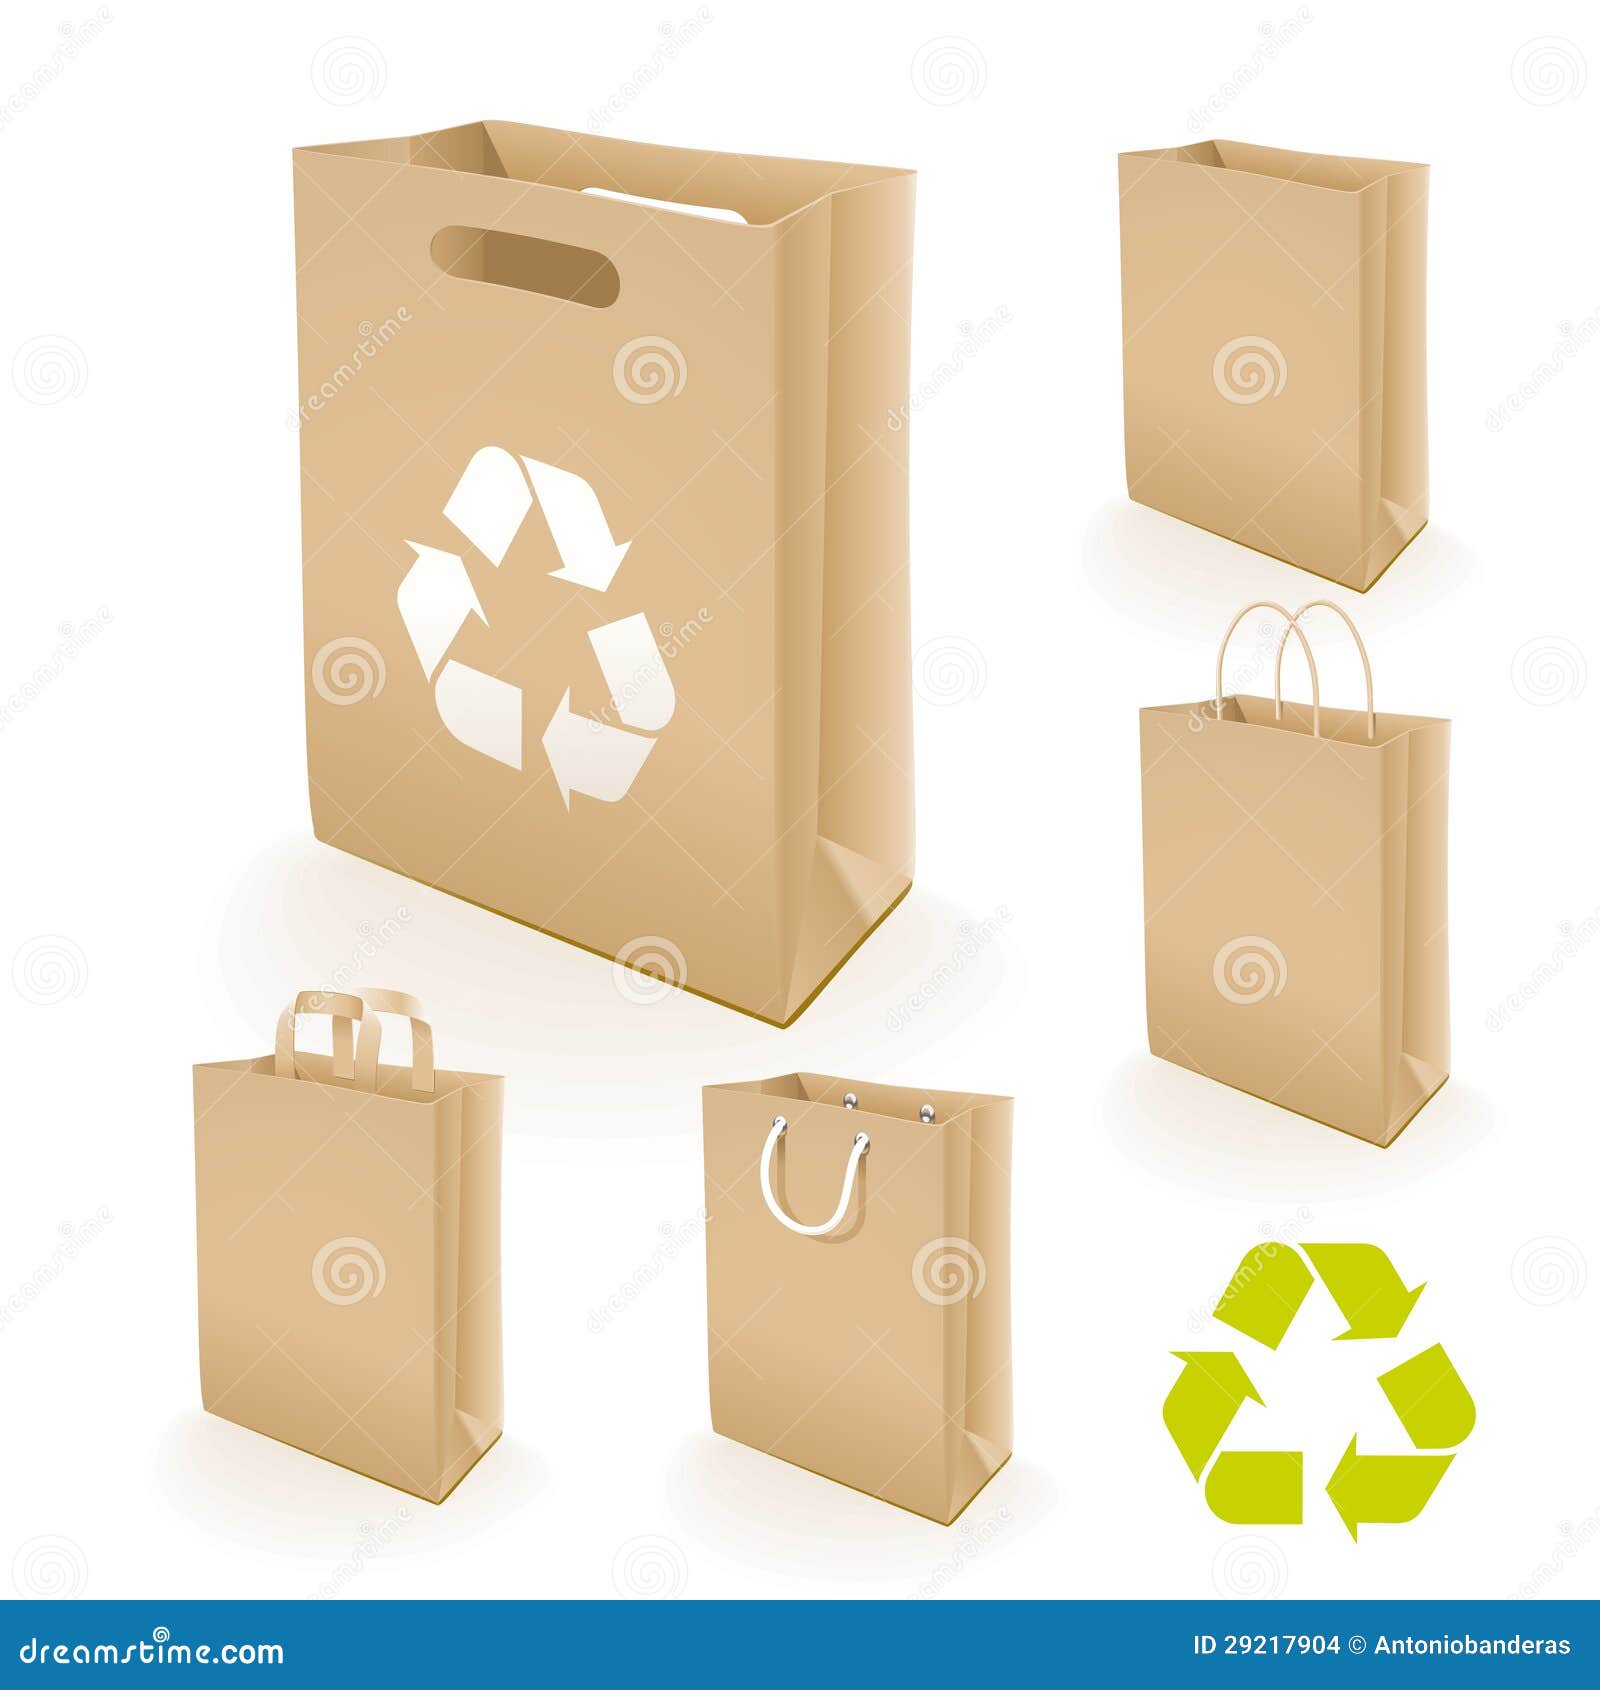 Recycled Paper Bag PNG Images & PSDs for Download | PixelSquid - S112228658